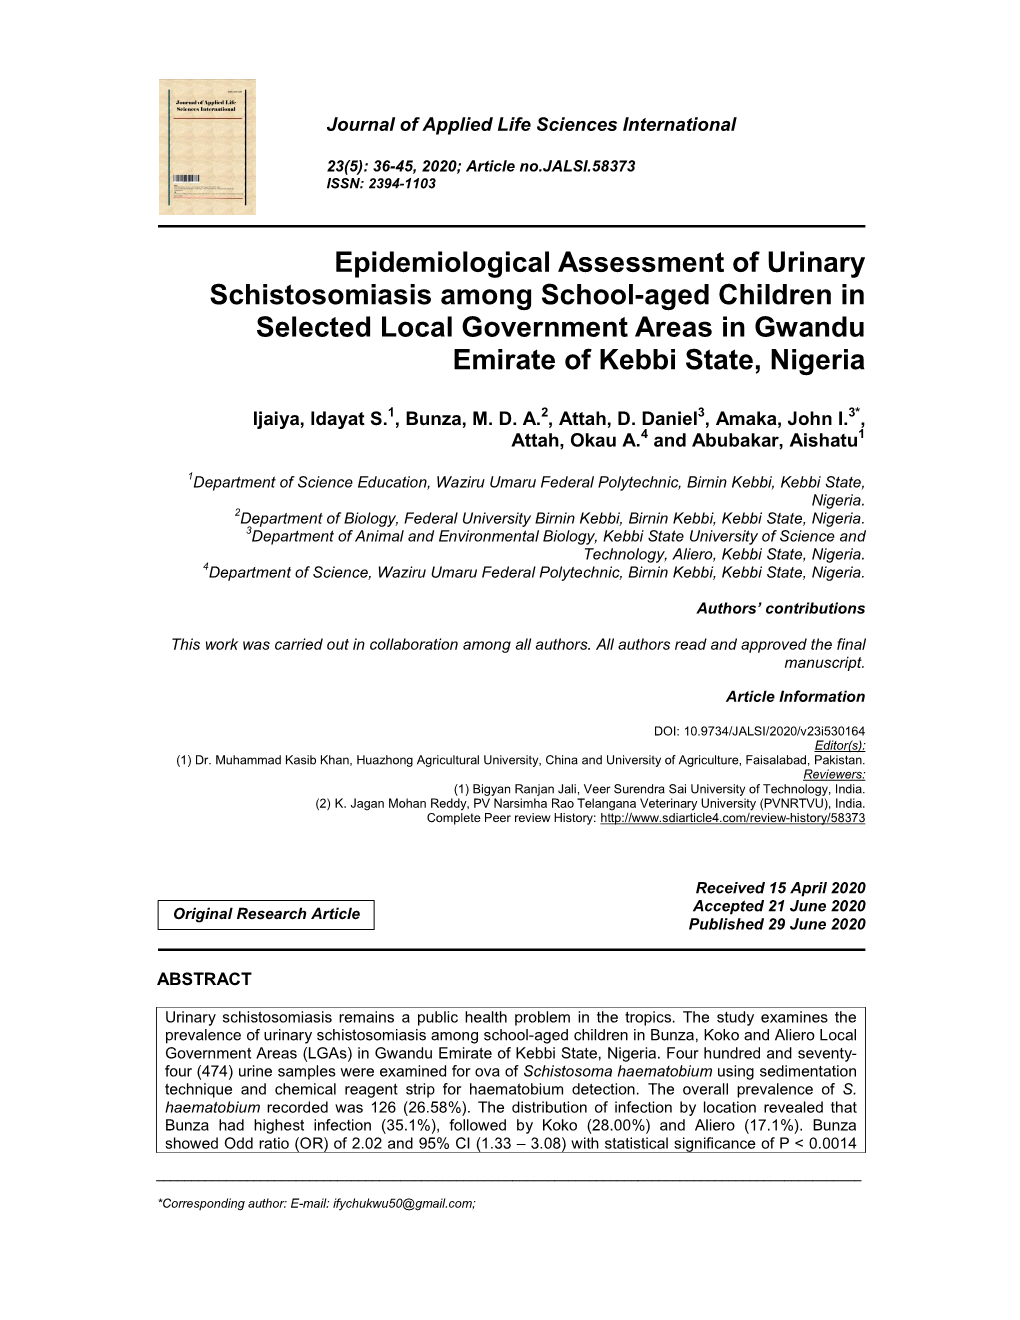 Epidemiological Assessment of Urinary Schistosomiasis Among School-Aged Children in Selected Local Government Areas in Gwandu Emirate of Kebbi State, Nigeria